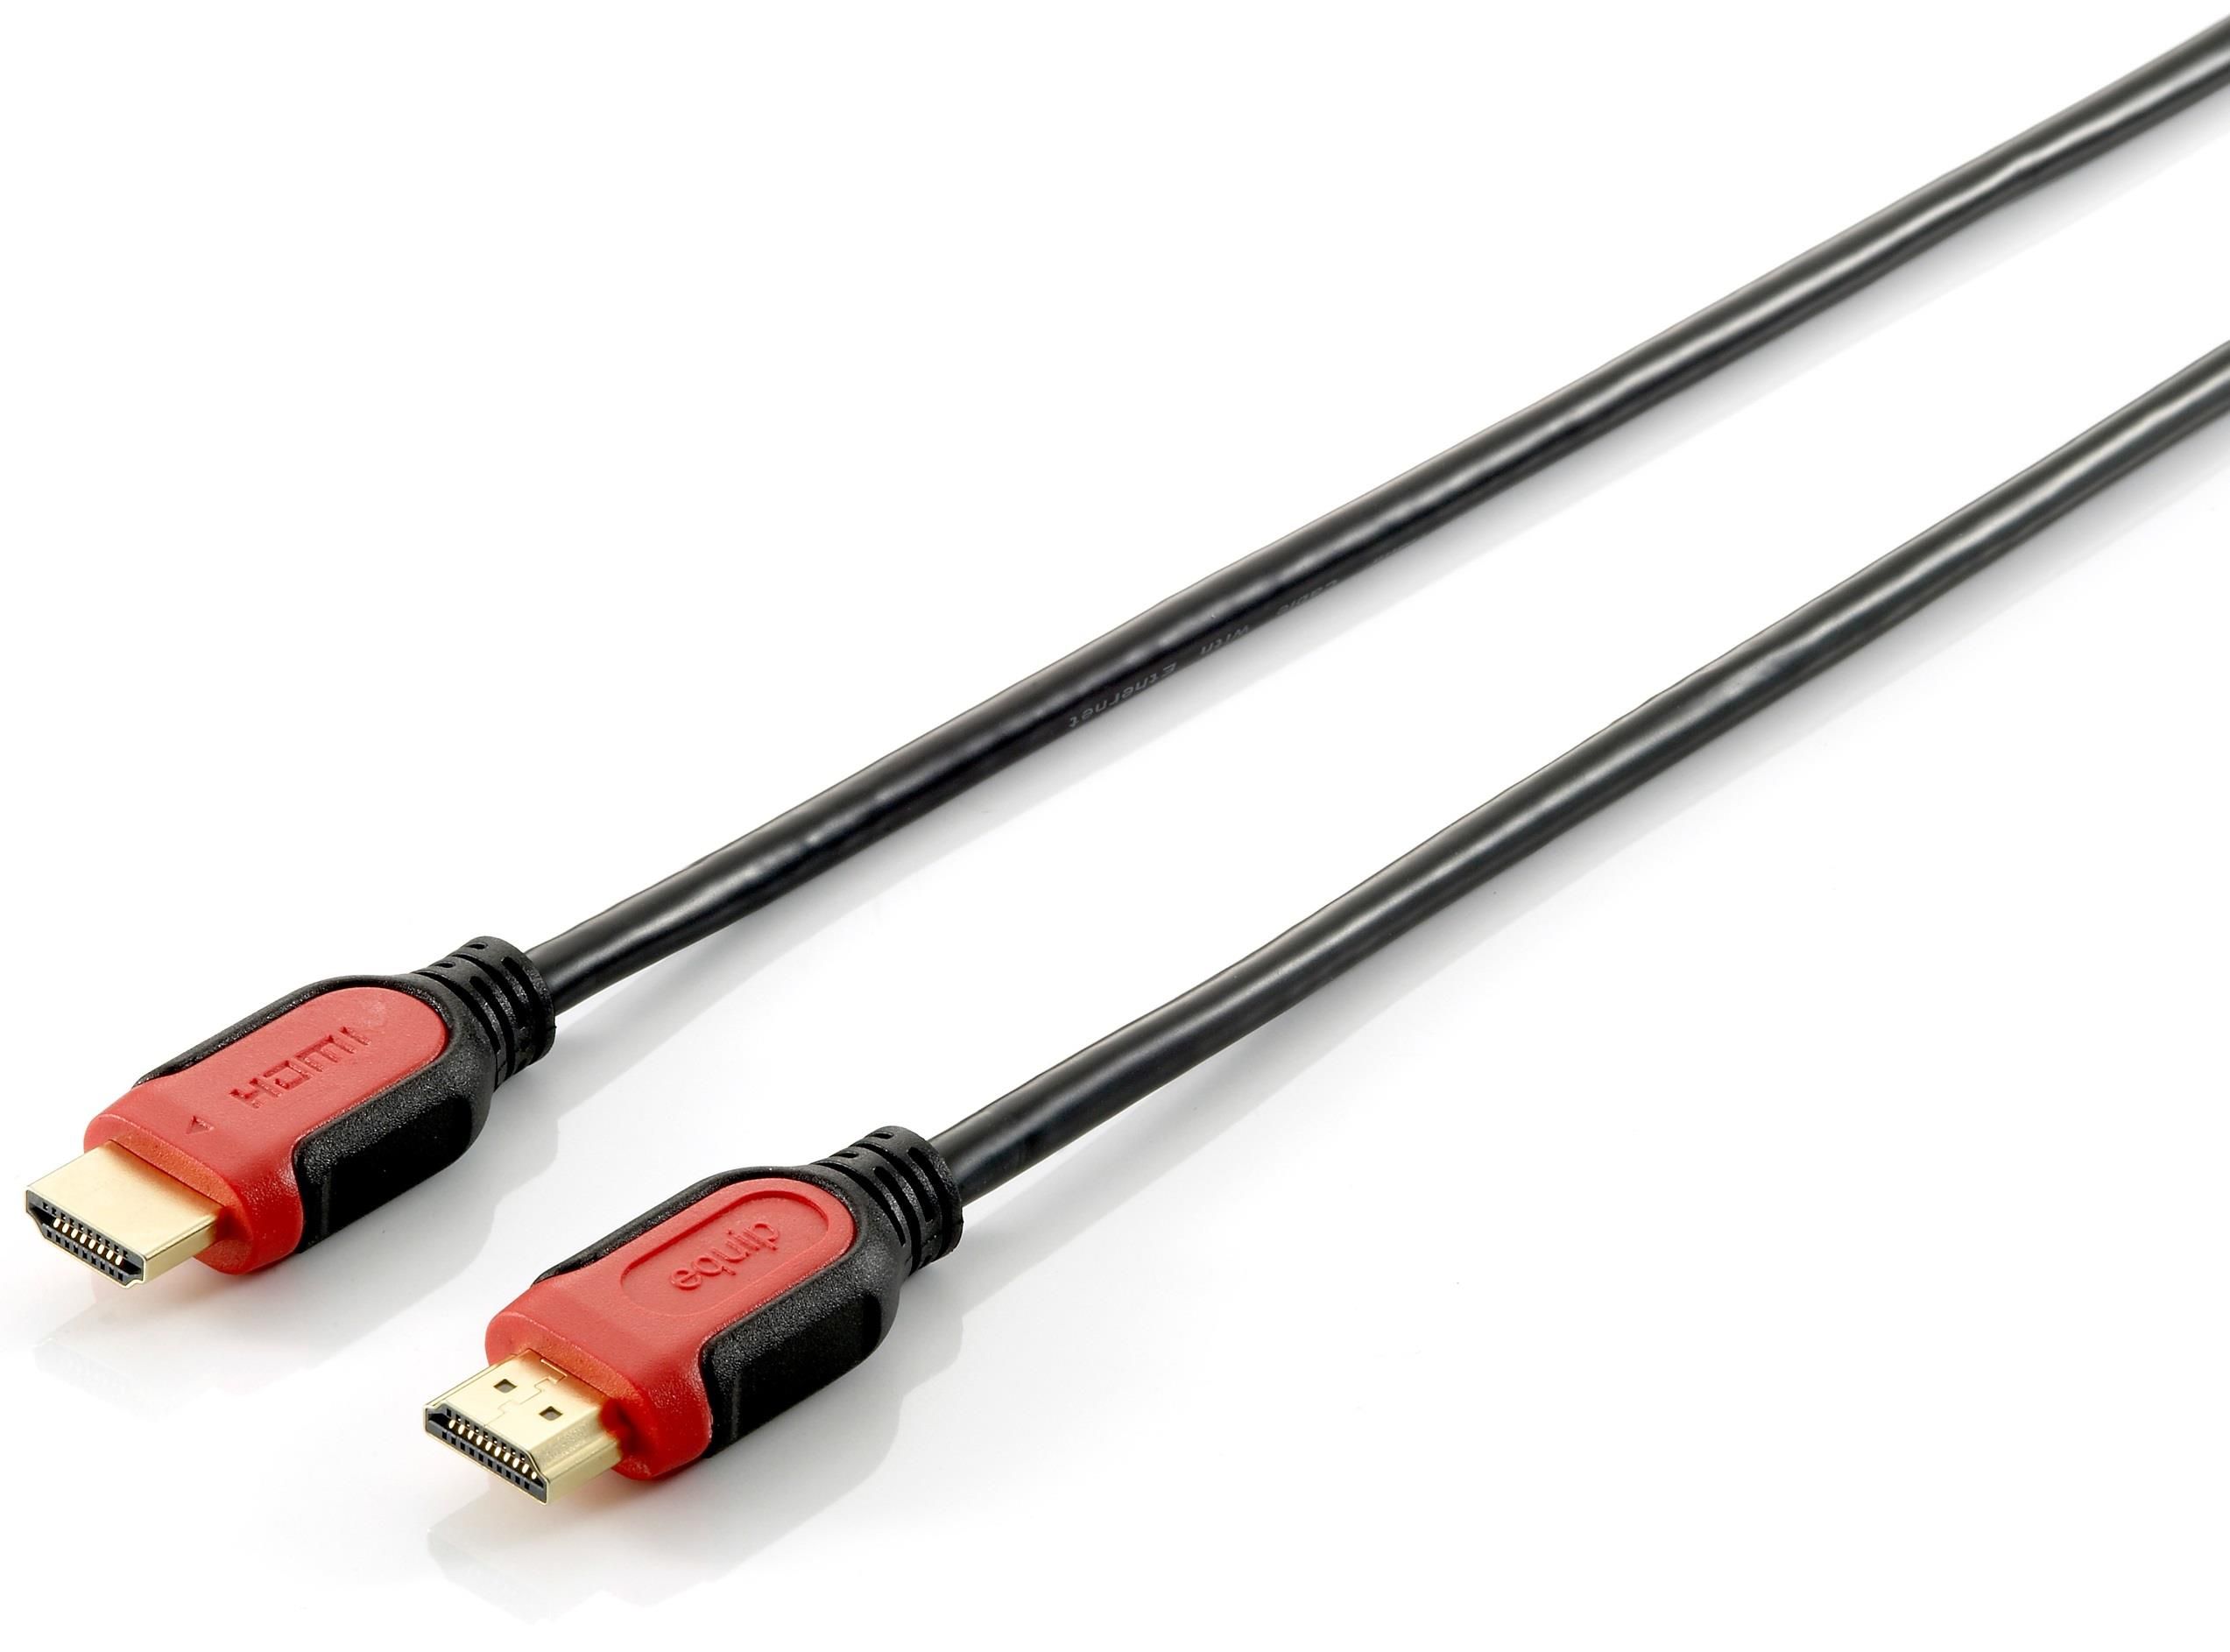 Equip Highspeed Hdmi Cable